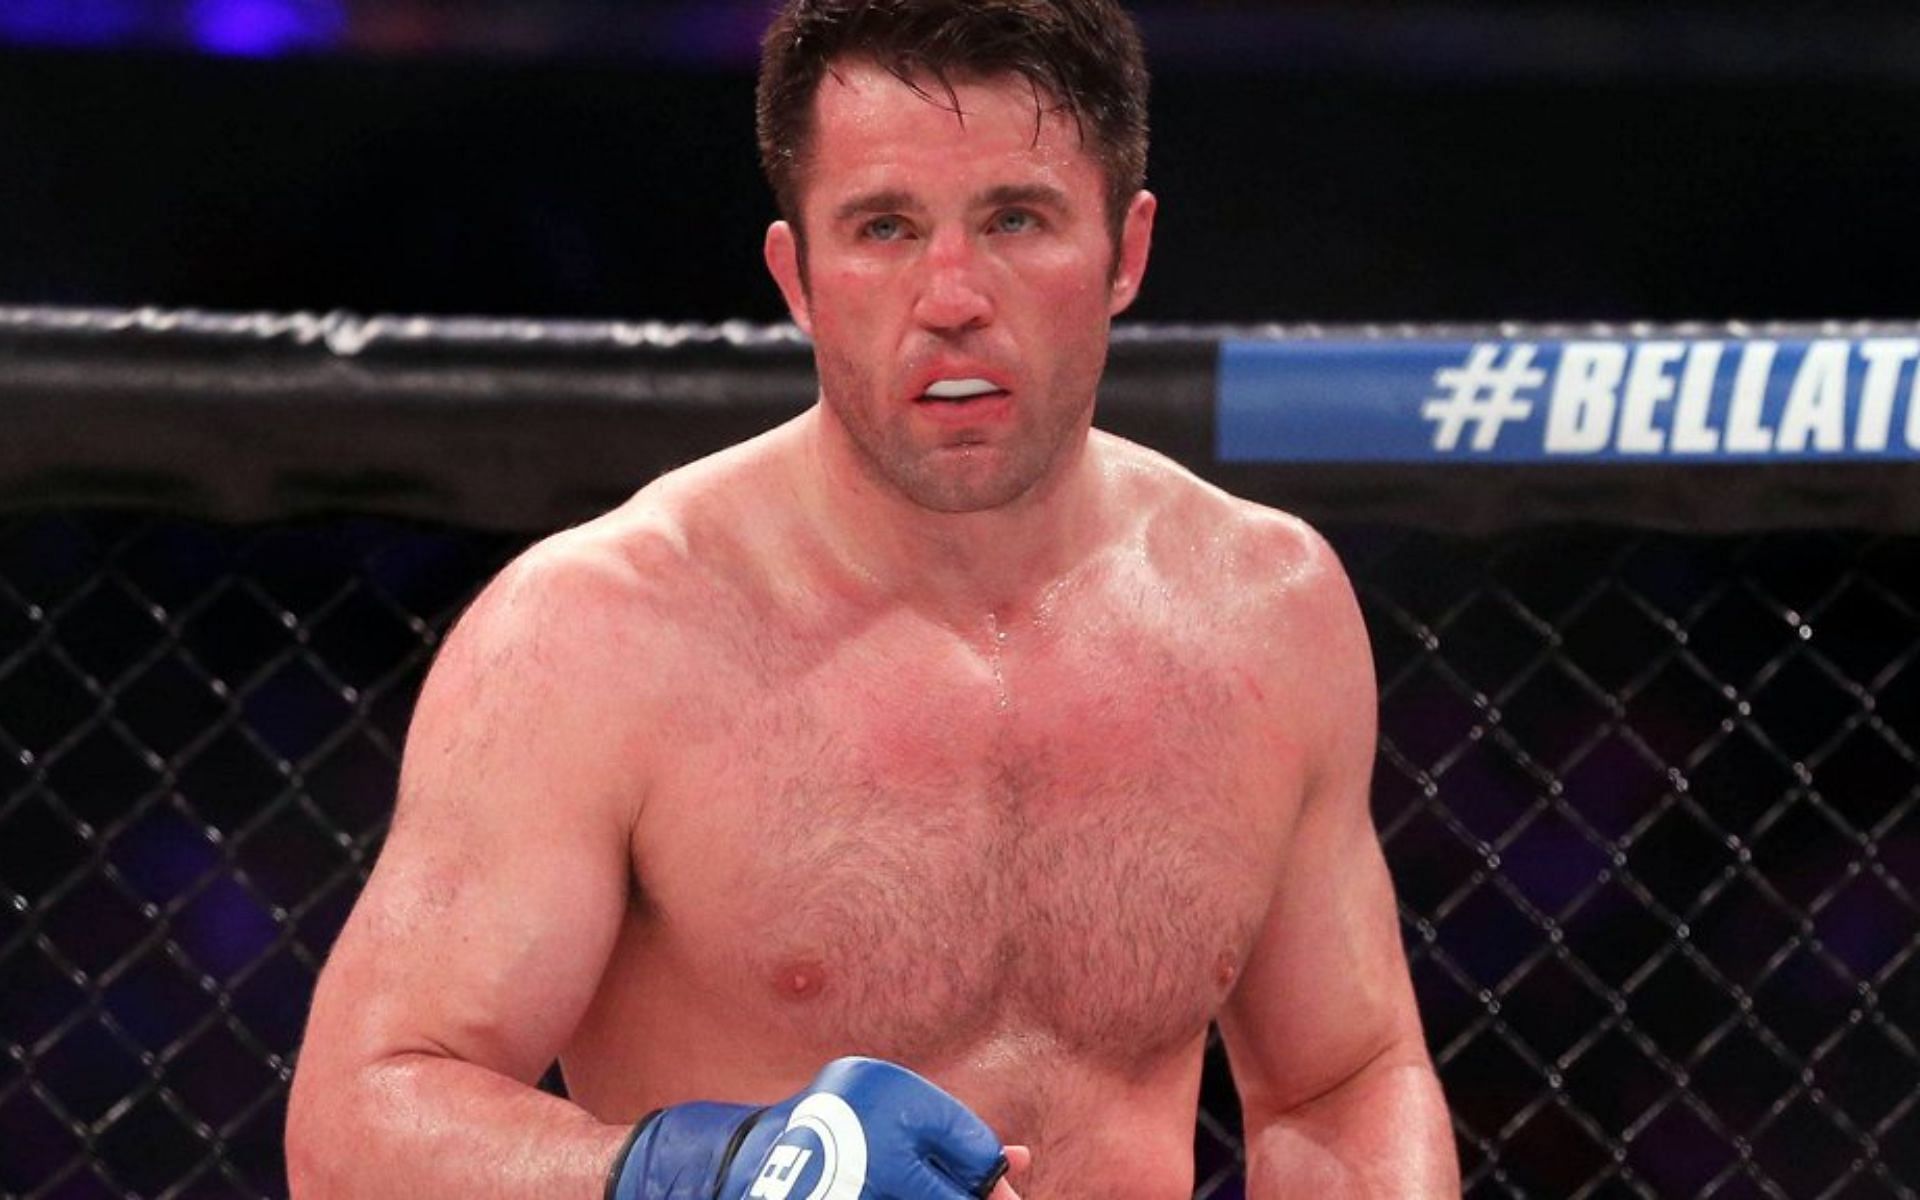 What is Chael Sonnen's UFC record?